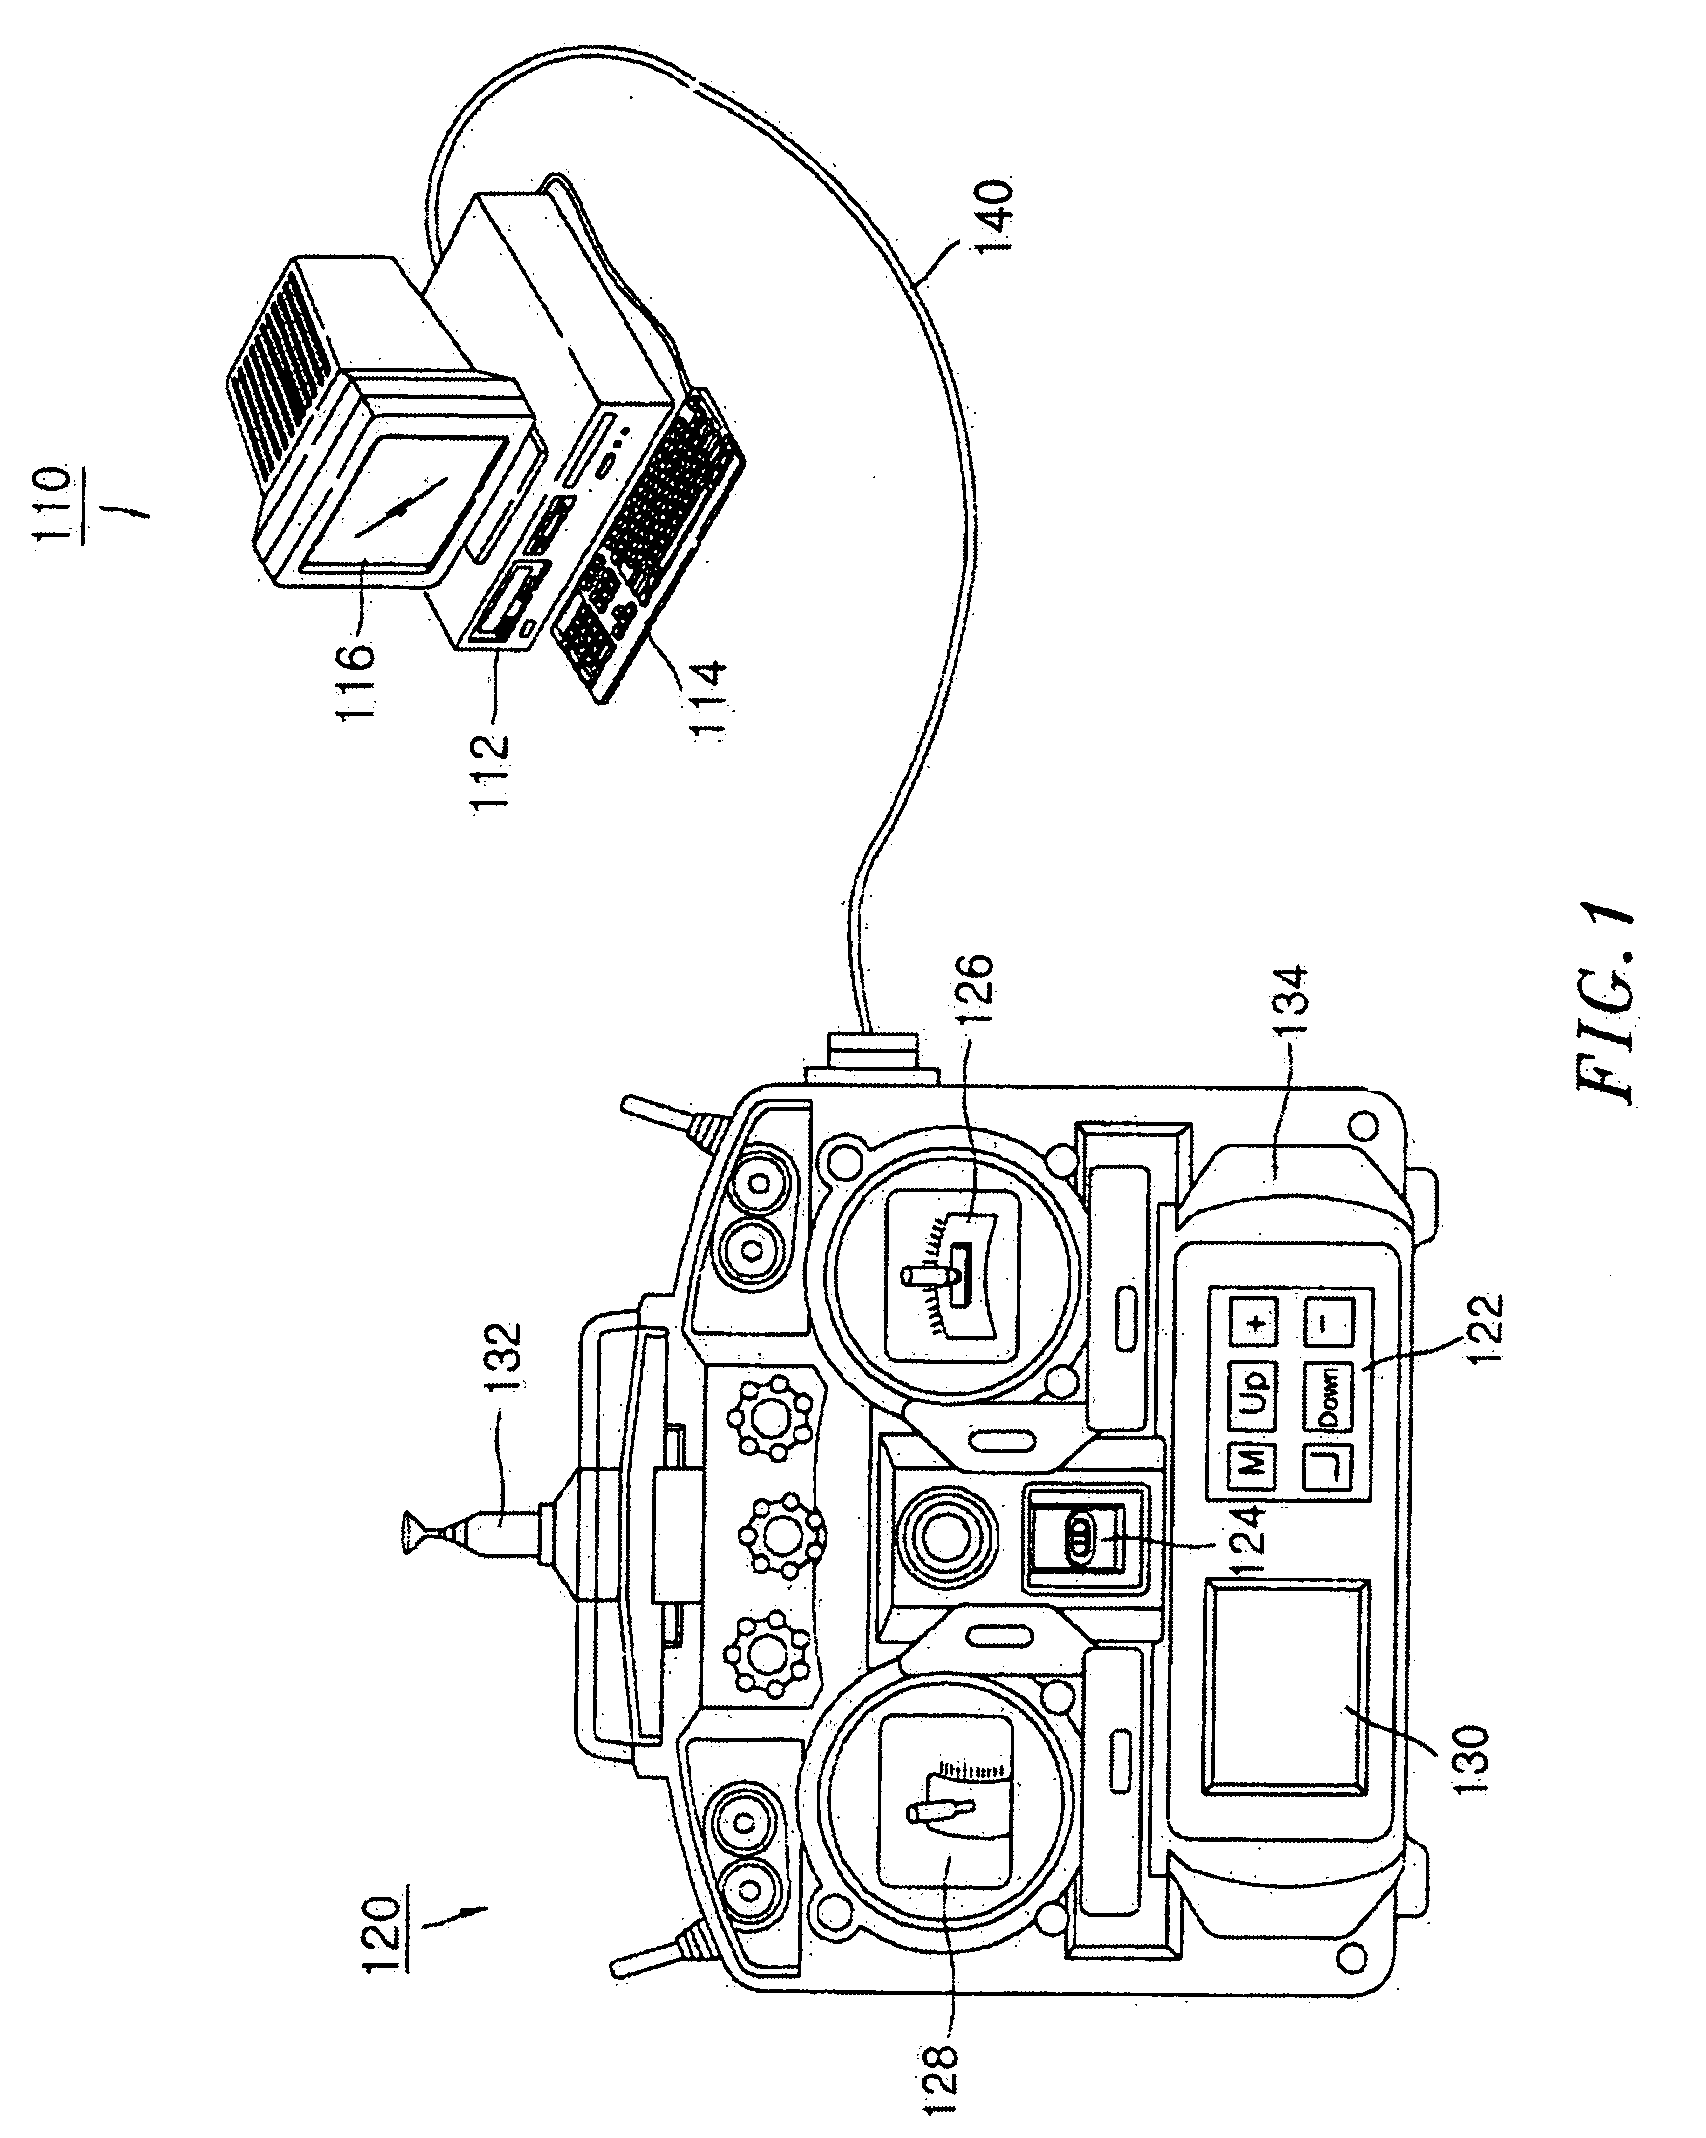 Dual-function remote controller capable of manipulating video game and method thereof